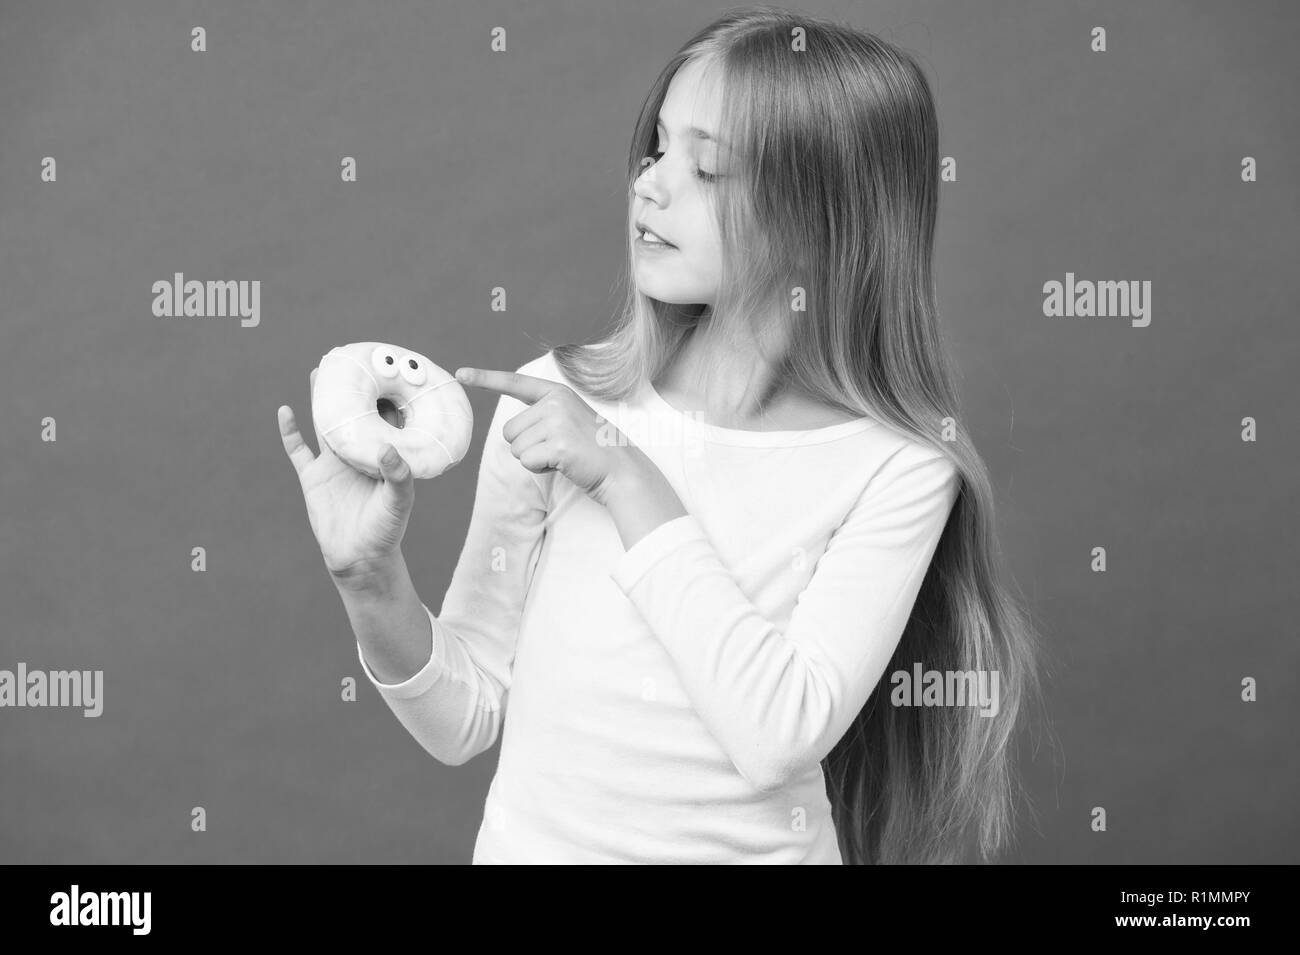 Girl holding fluffy doughnut. Glazed bagel with eyes, creative dessert. Kid eating icing out off doughnut, sweet tooth heaven. Child with long hair wearing white jumper isolated on purple background. Stock Photo